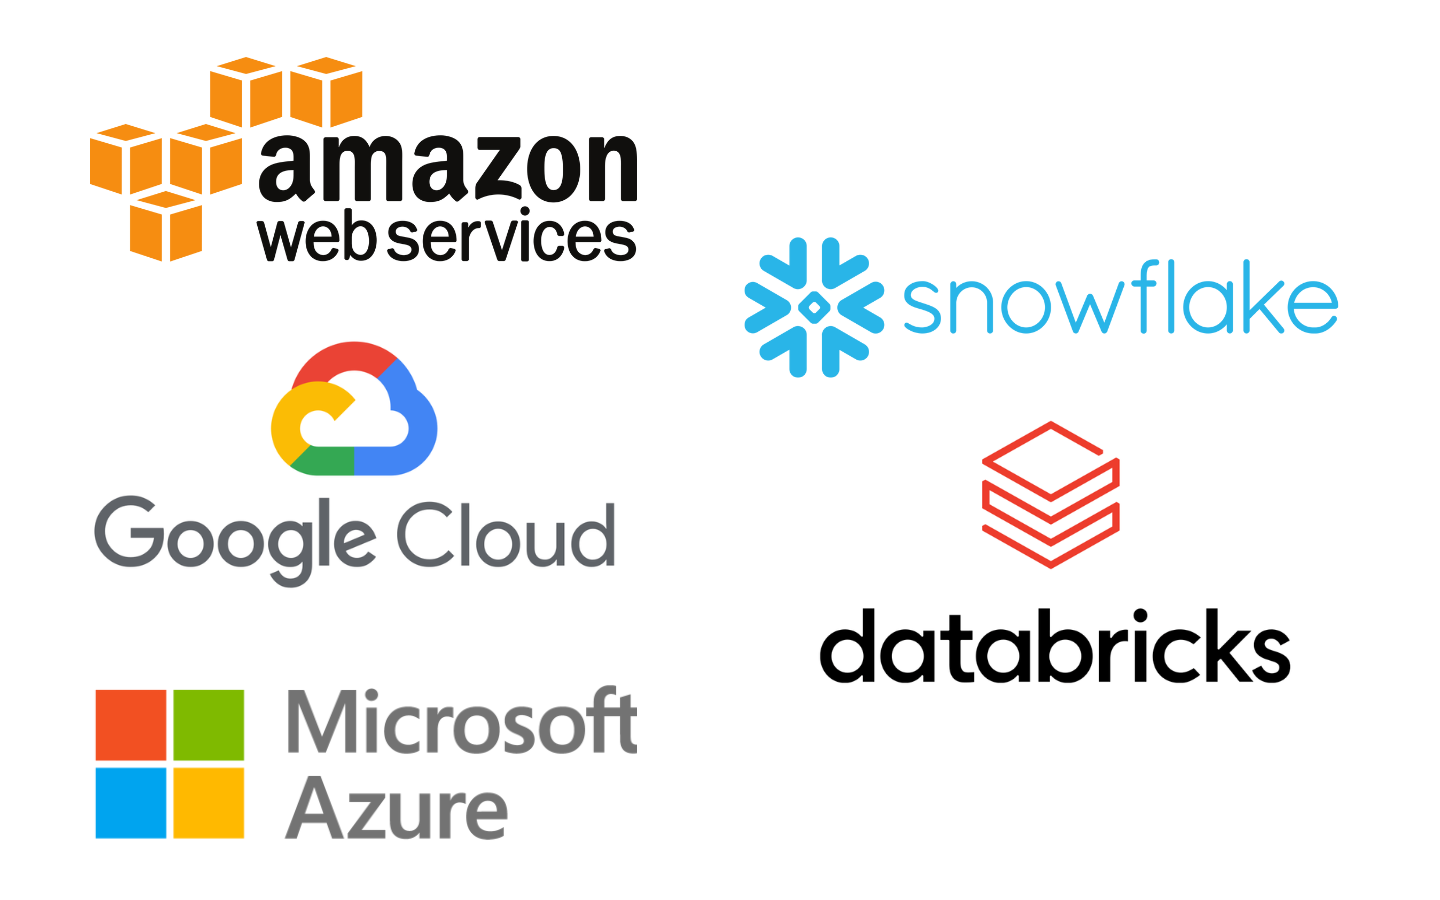 Simplify and accelerate your multi-cloud data engineering journey by leveraging standardized, reusable API building blocks on any cloud platform: AWS, Google Cloud, Azure, Snowflake or Databricks.